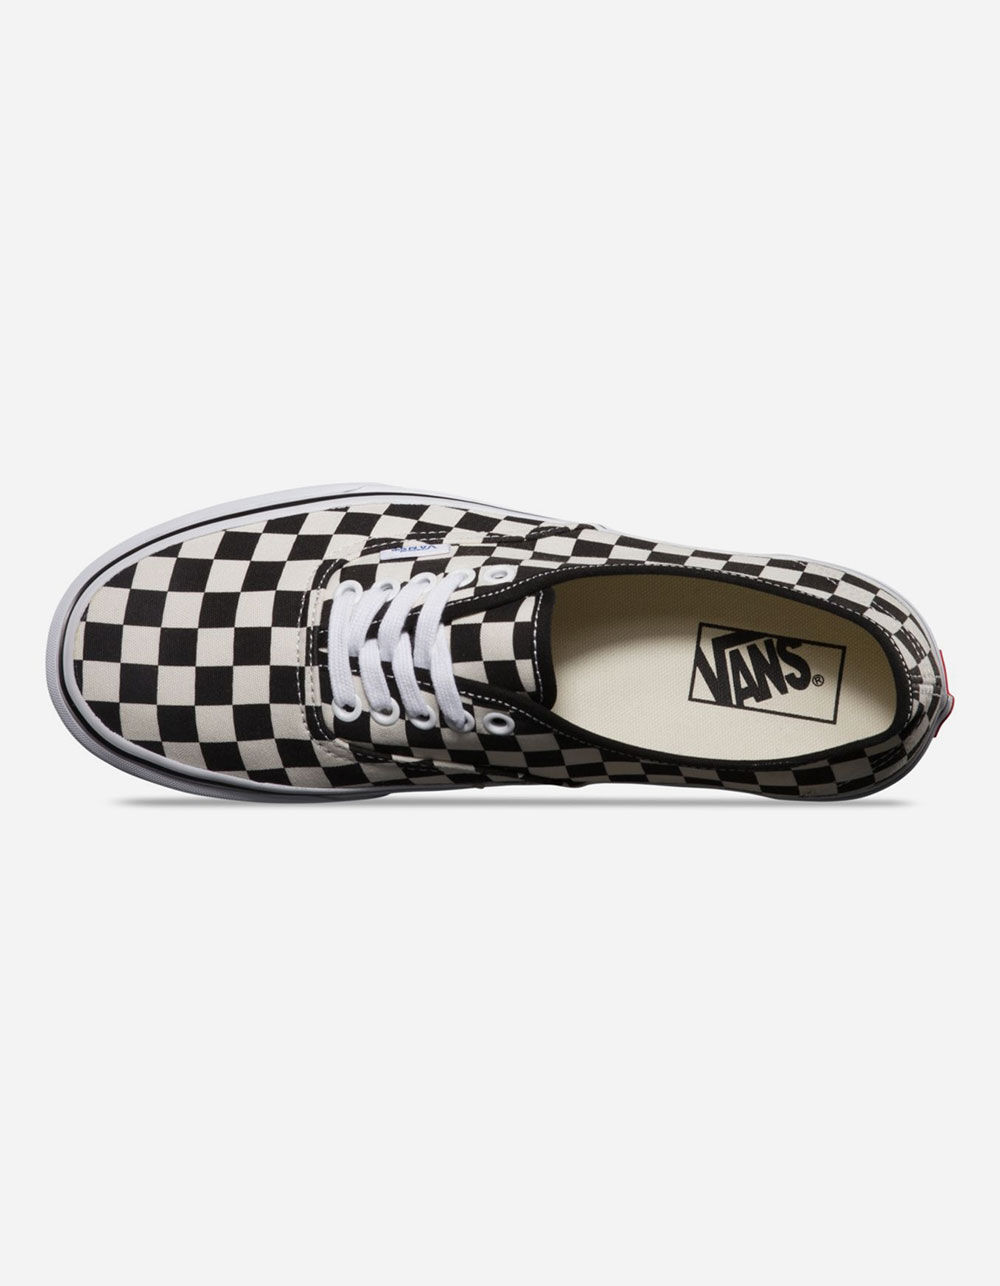 VANS Authentic Golden Coast Checkerboard Shoes image number 2